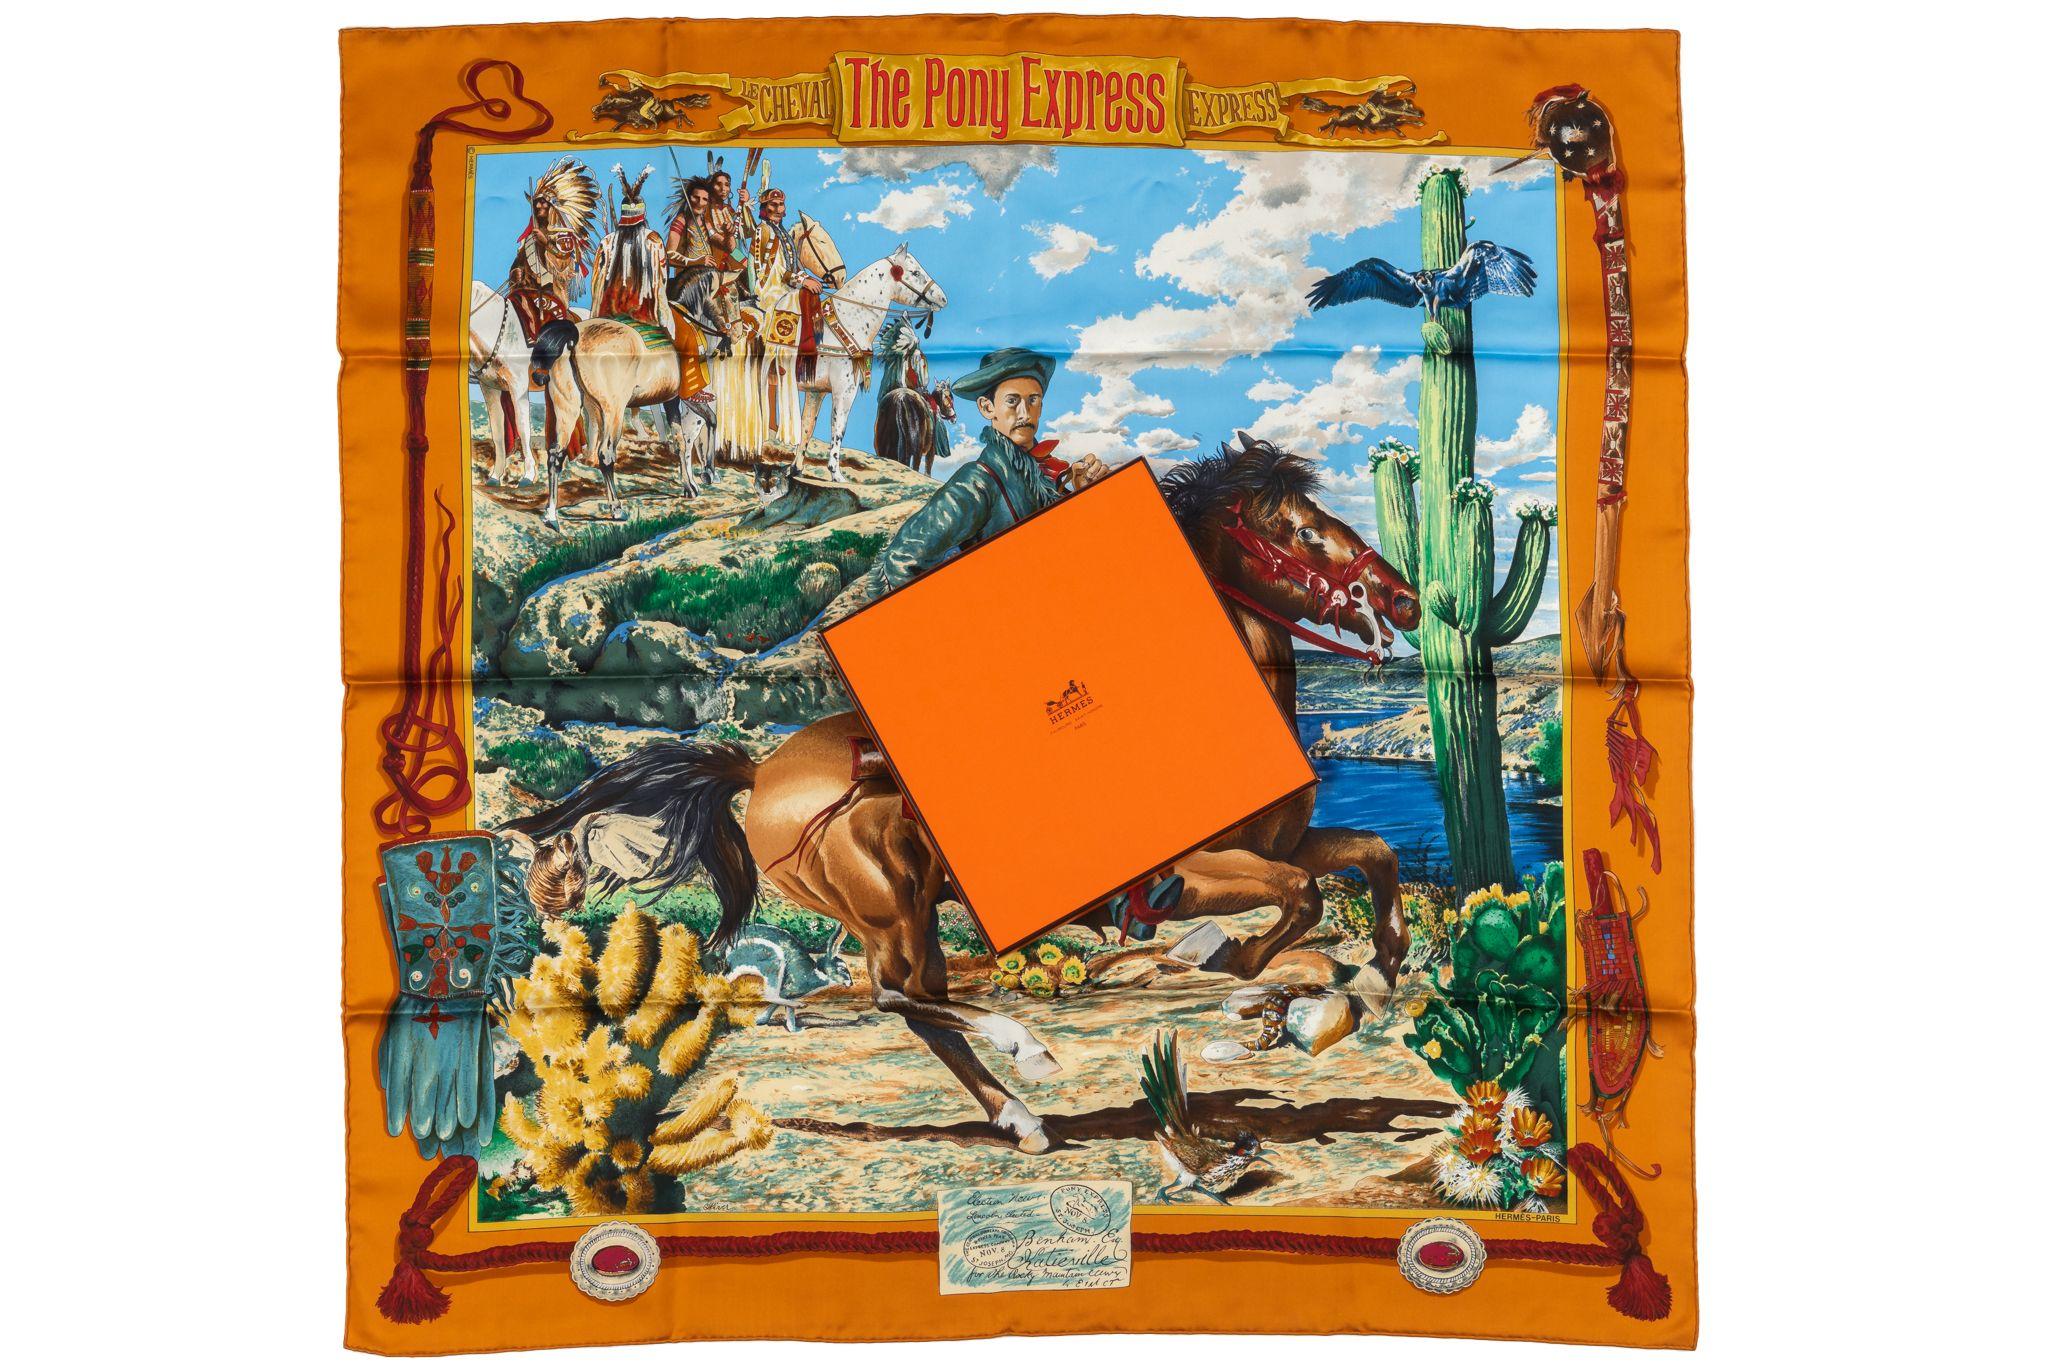 Hermes Moutard Silk Pony Express Scarf 3